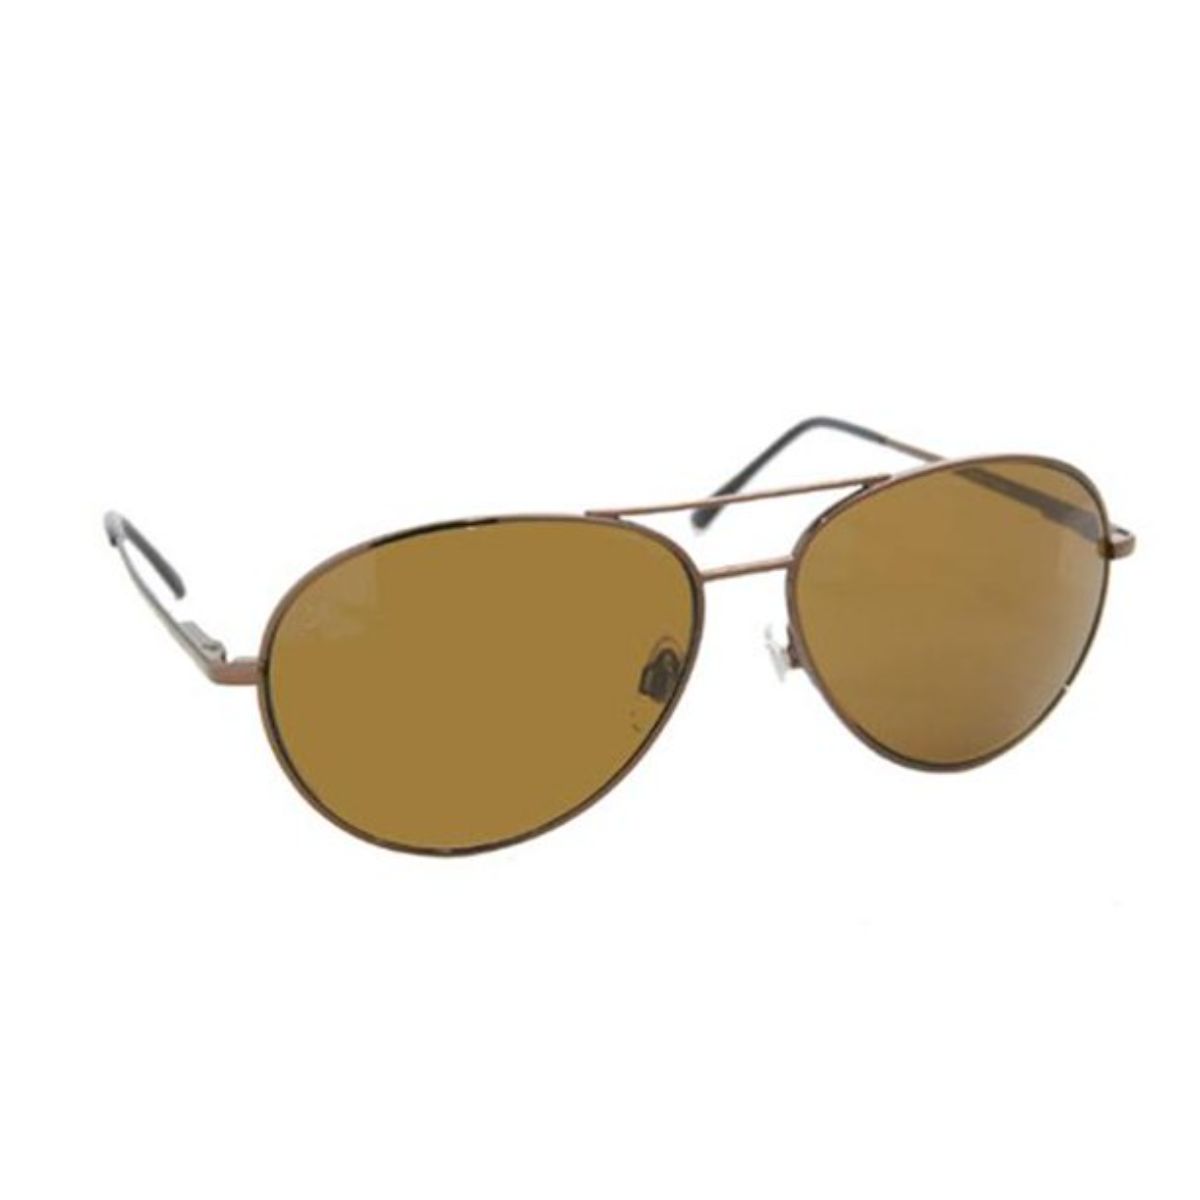 Picture of Coppermax 3708GPP BRN/AMBER Aviator Polarized Sunglasses - Shiny Brown - Amber Lens